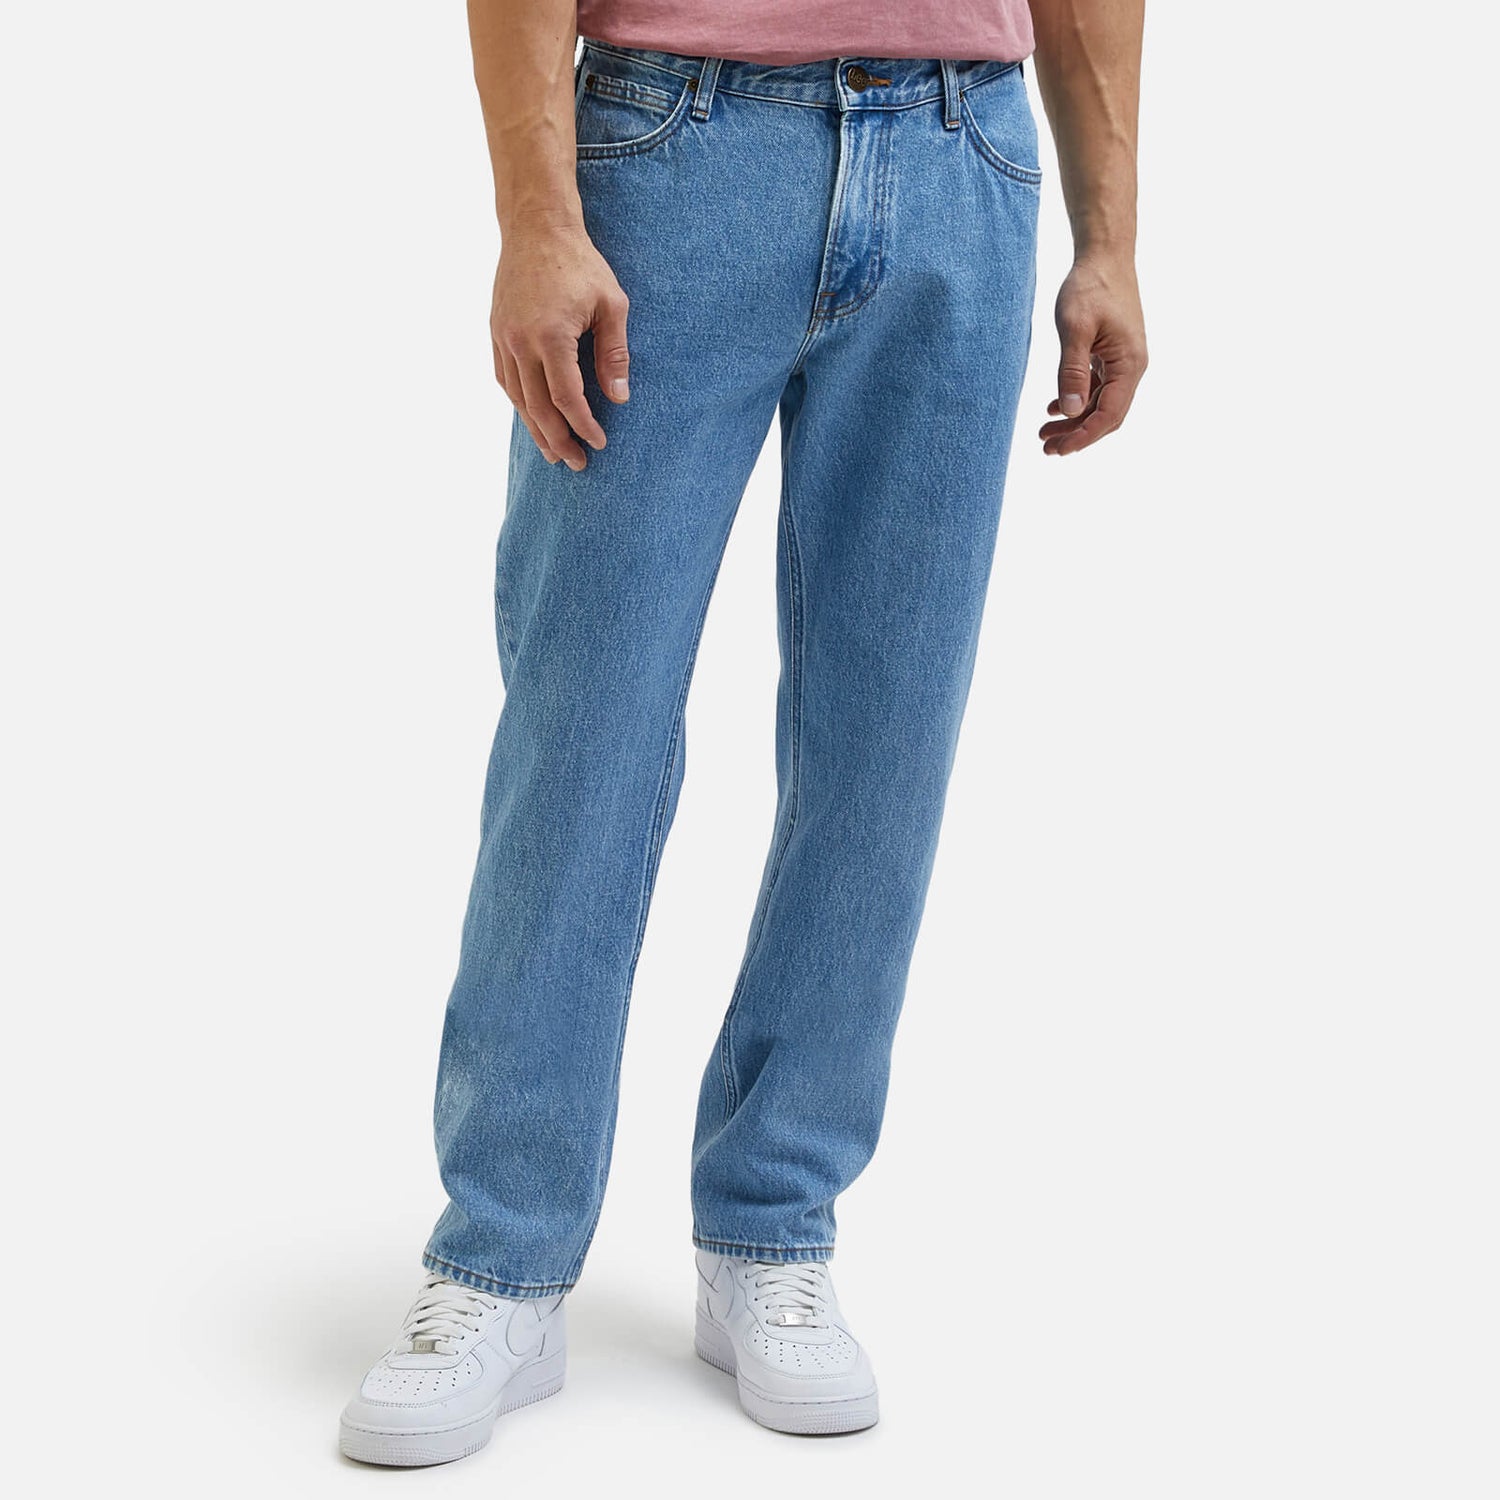 Lee Men's West Relaxed Fit Jeans - Stone Free - W30/L30